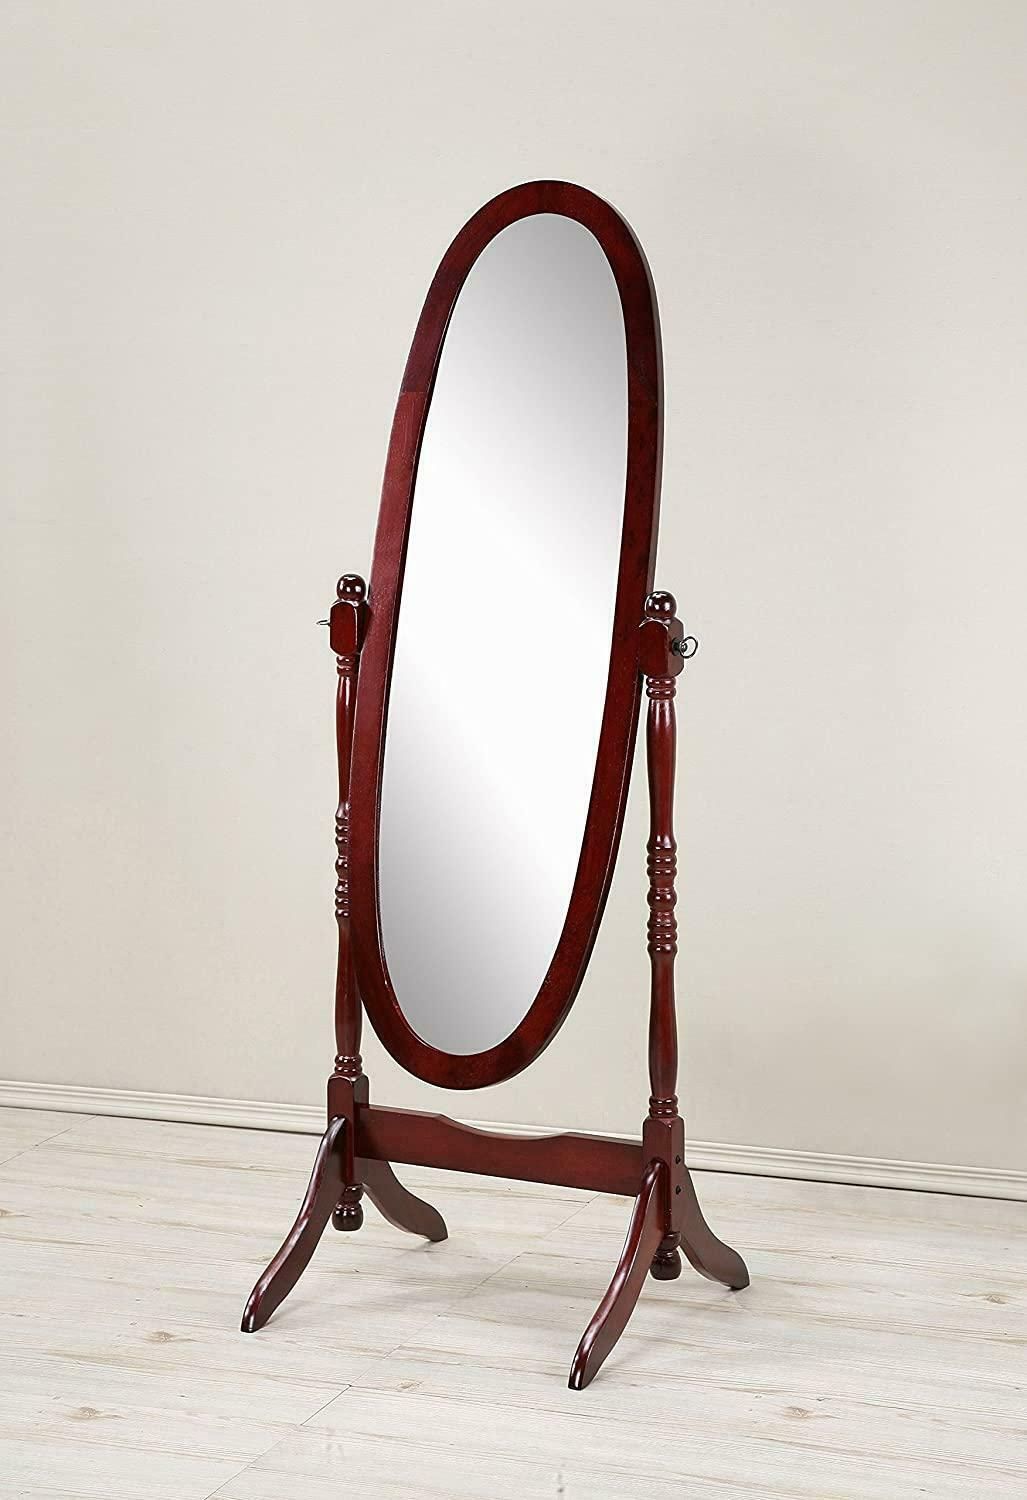 Antique Floor Mirror Wood Bedroom Dressing Full Length Cheval Free Within Antique Brass Standing Mirrors (View 9 of 15)